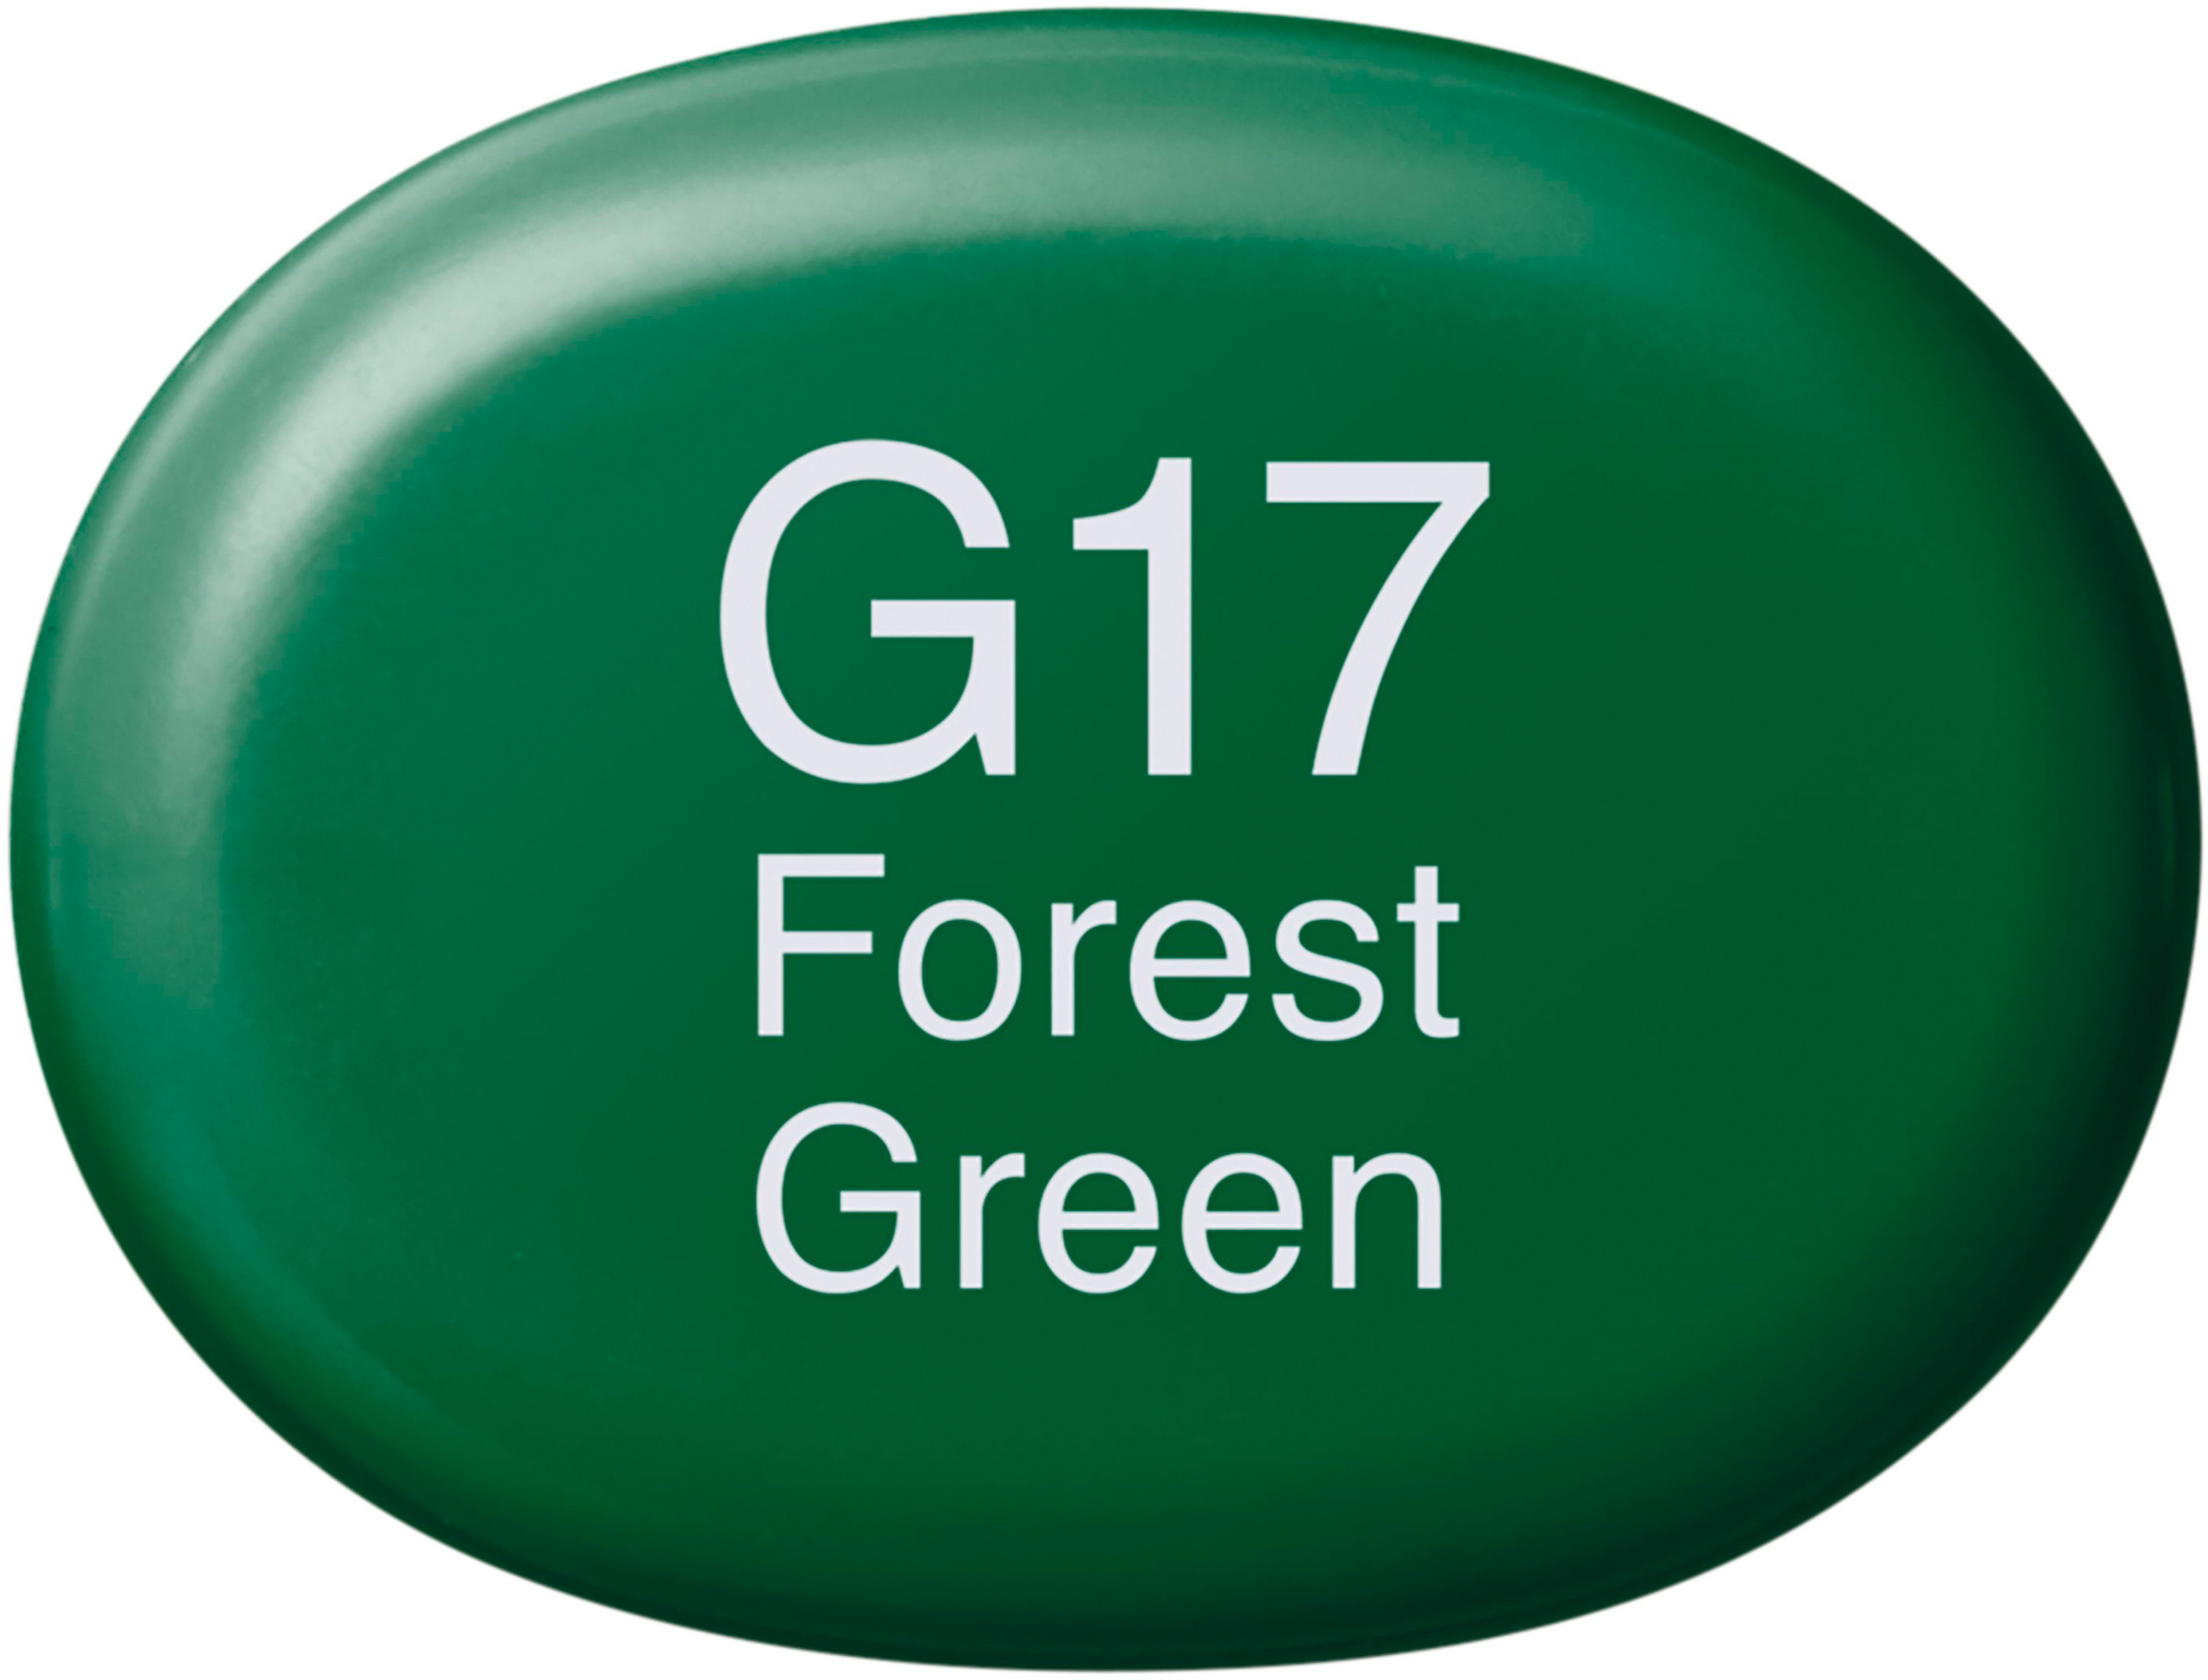 COPIC Marker Sketch 2107523 G17 - Forest Green